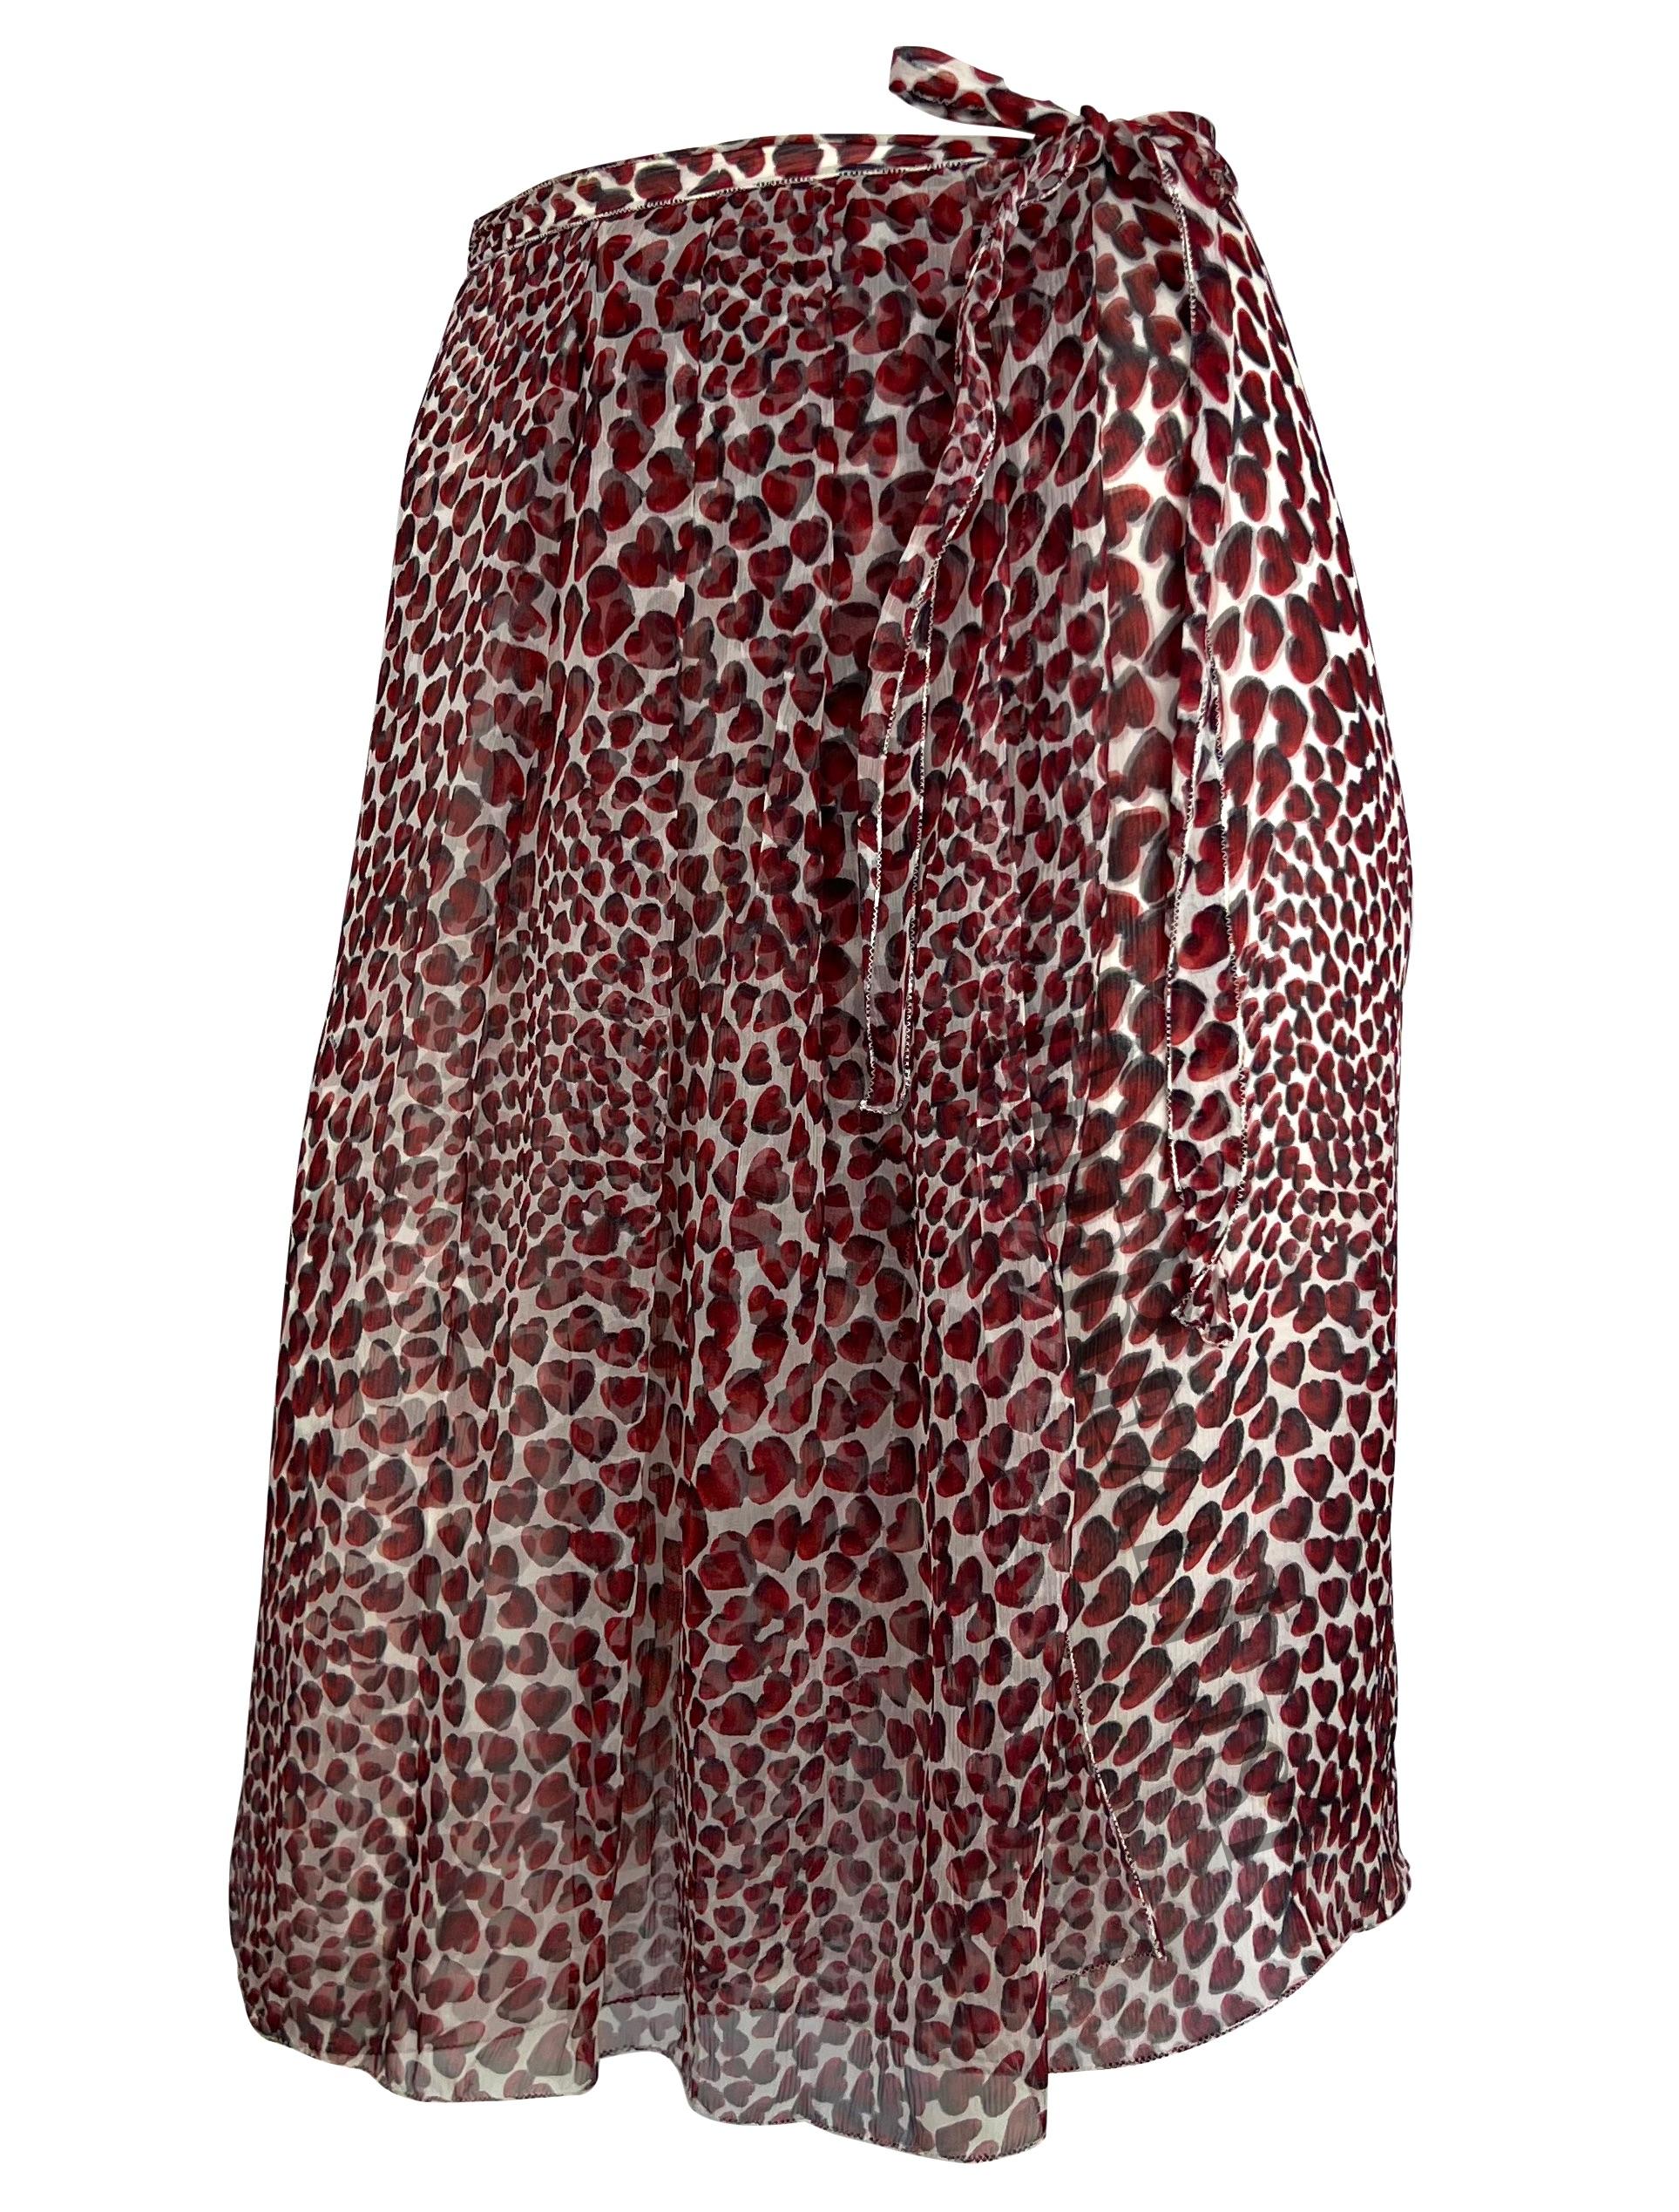 S/S 2000 Prada by Miuccia Semi-Sheer Heart Print Chiffon Wrap Skirt In Excellent Condition For Sale In West Hollywood, CA